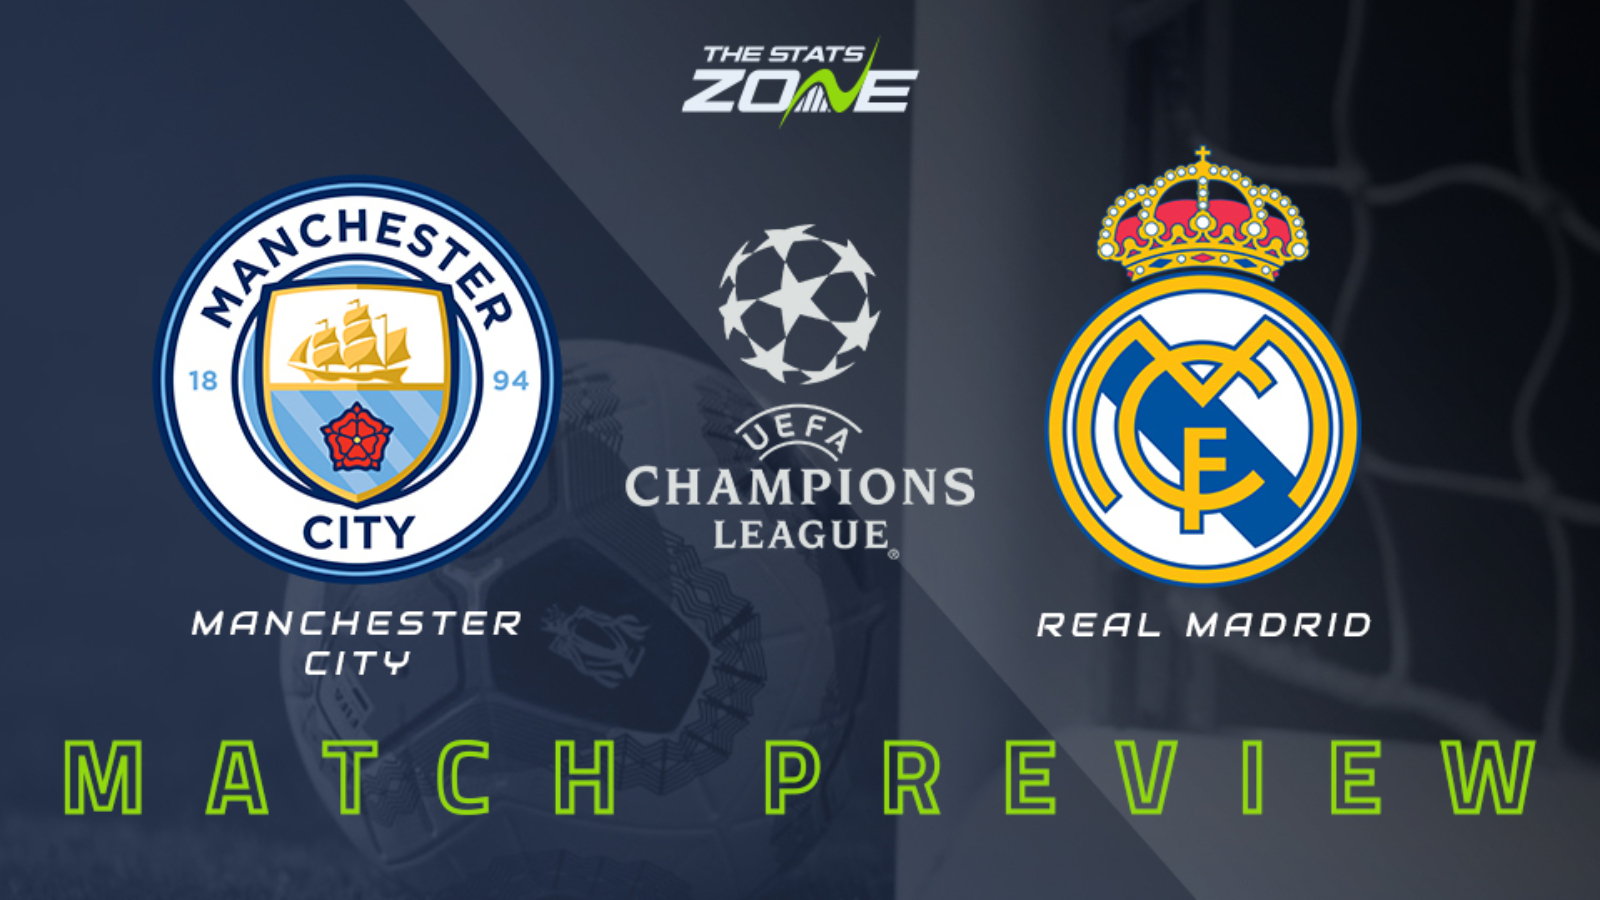 2019 20 Uefa Champions League Man City Vs Real Madrid Preview And Prediction The Stats Zone